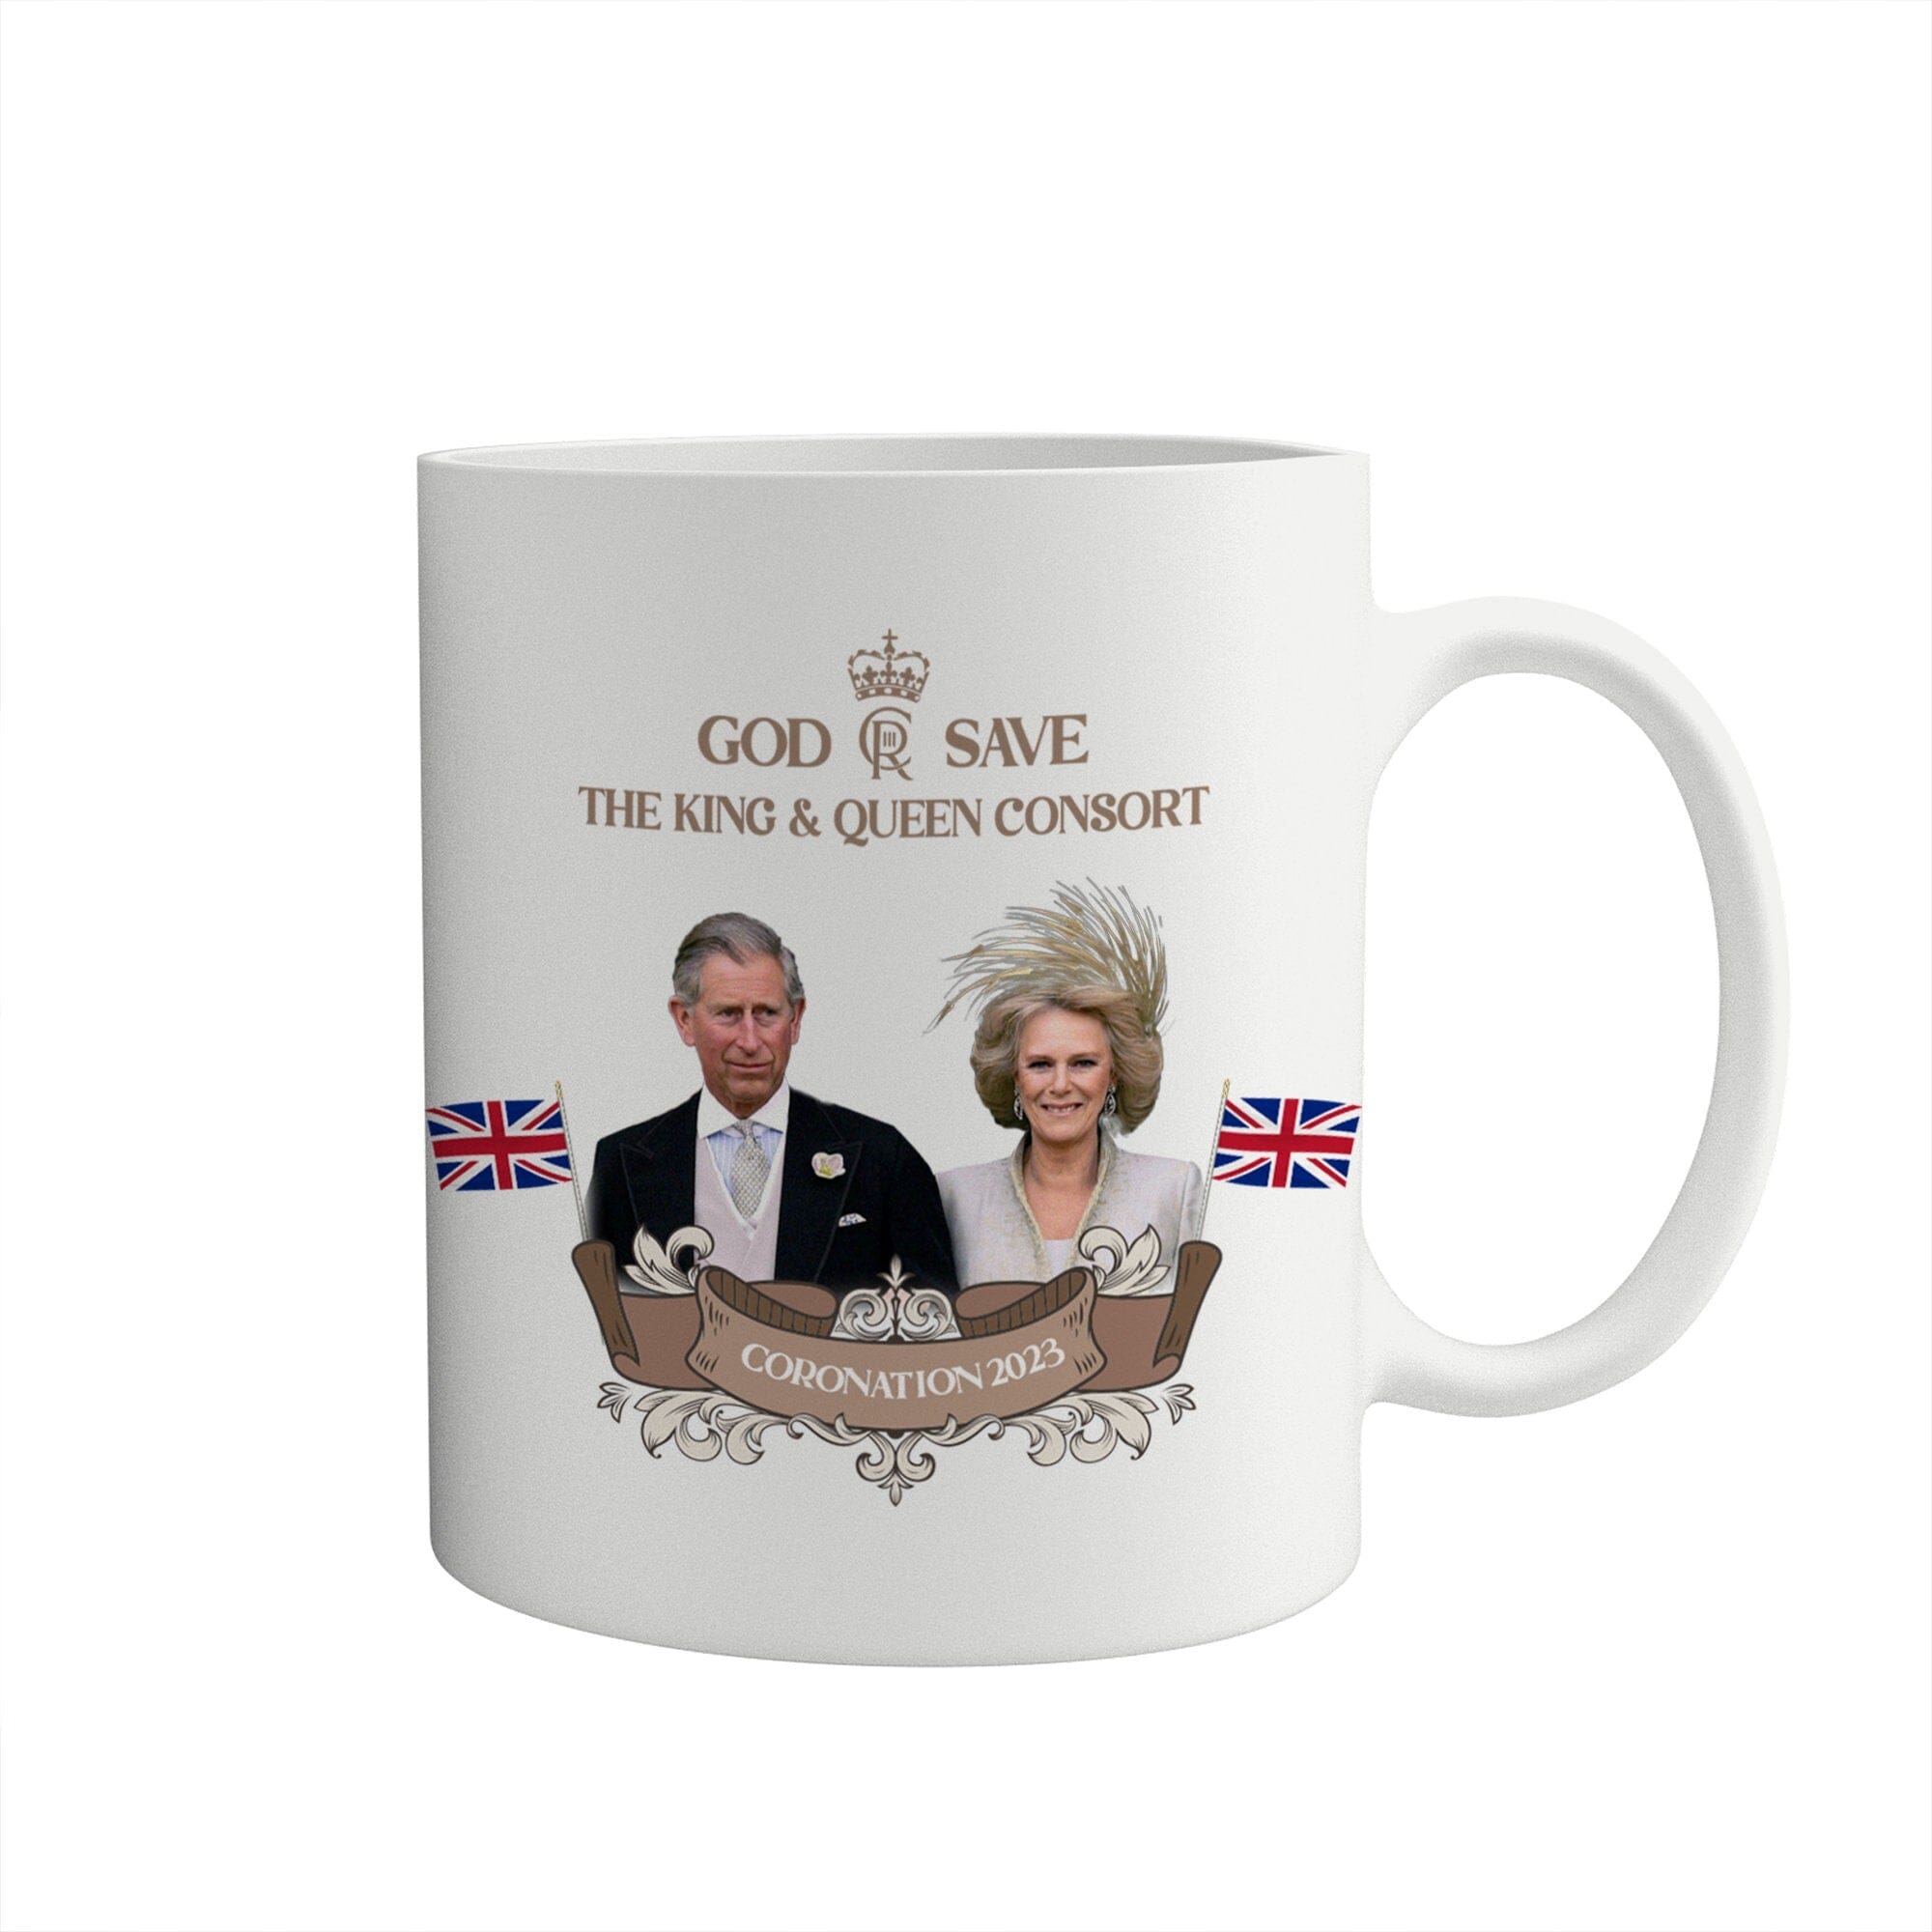 Coronation Mug With Hm King Charles Iii And Camilla Photos, God Save The King And Queen Consort